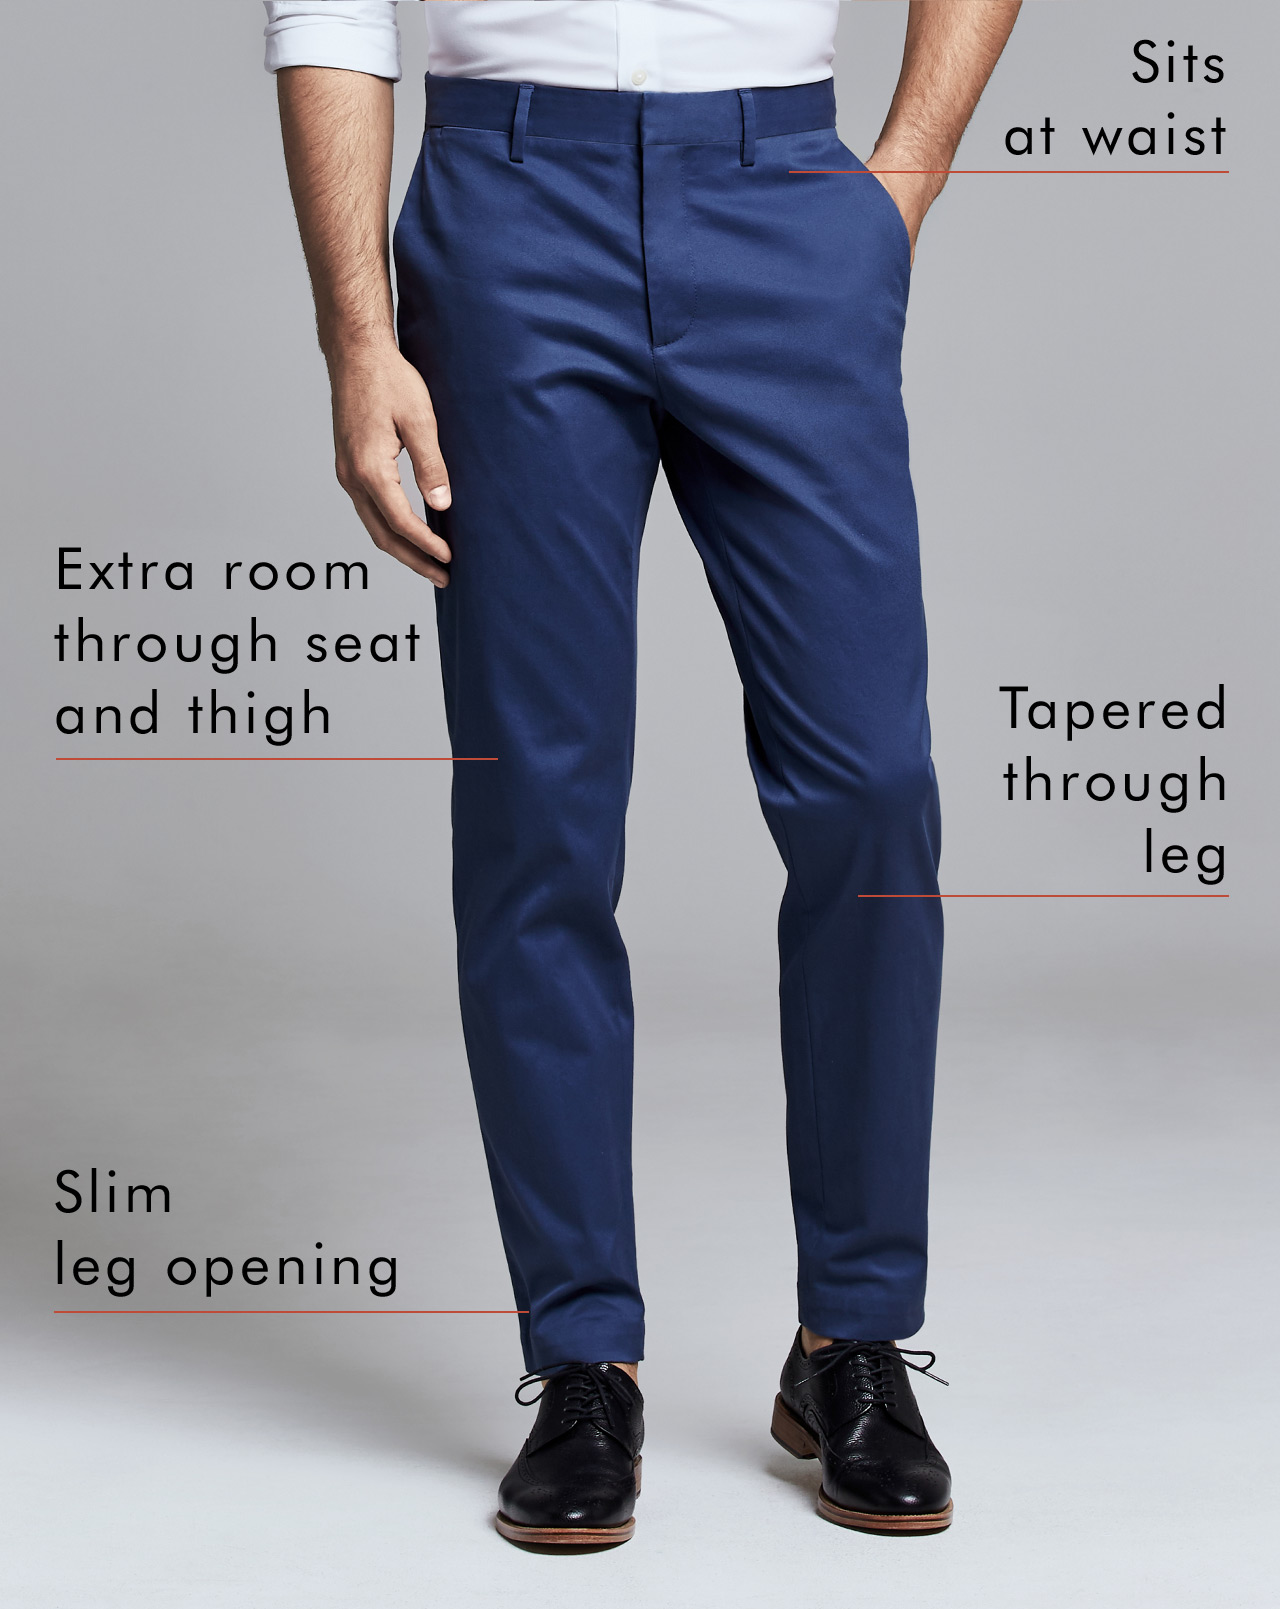 Fit Men's Chinos Fits